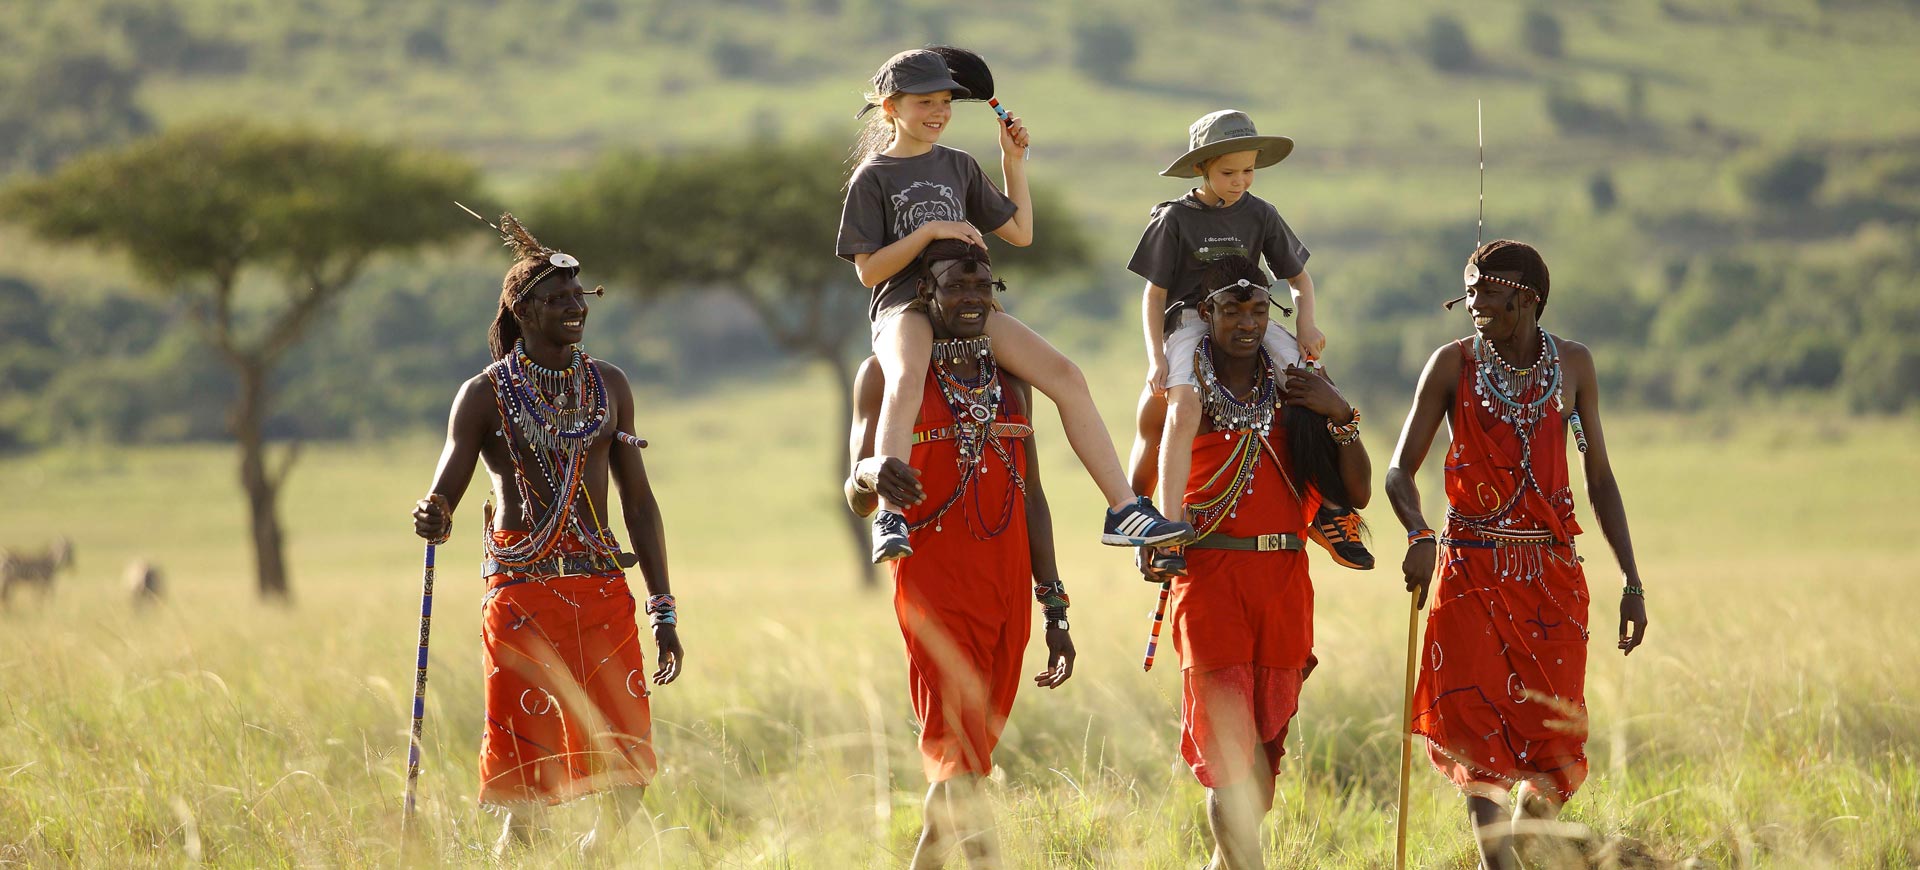 Masai People Carrying Tourist Kids on Kenya Safaris that can also be termed as walks on East African Safaris